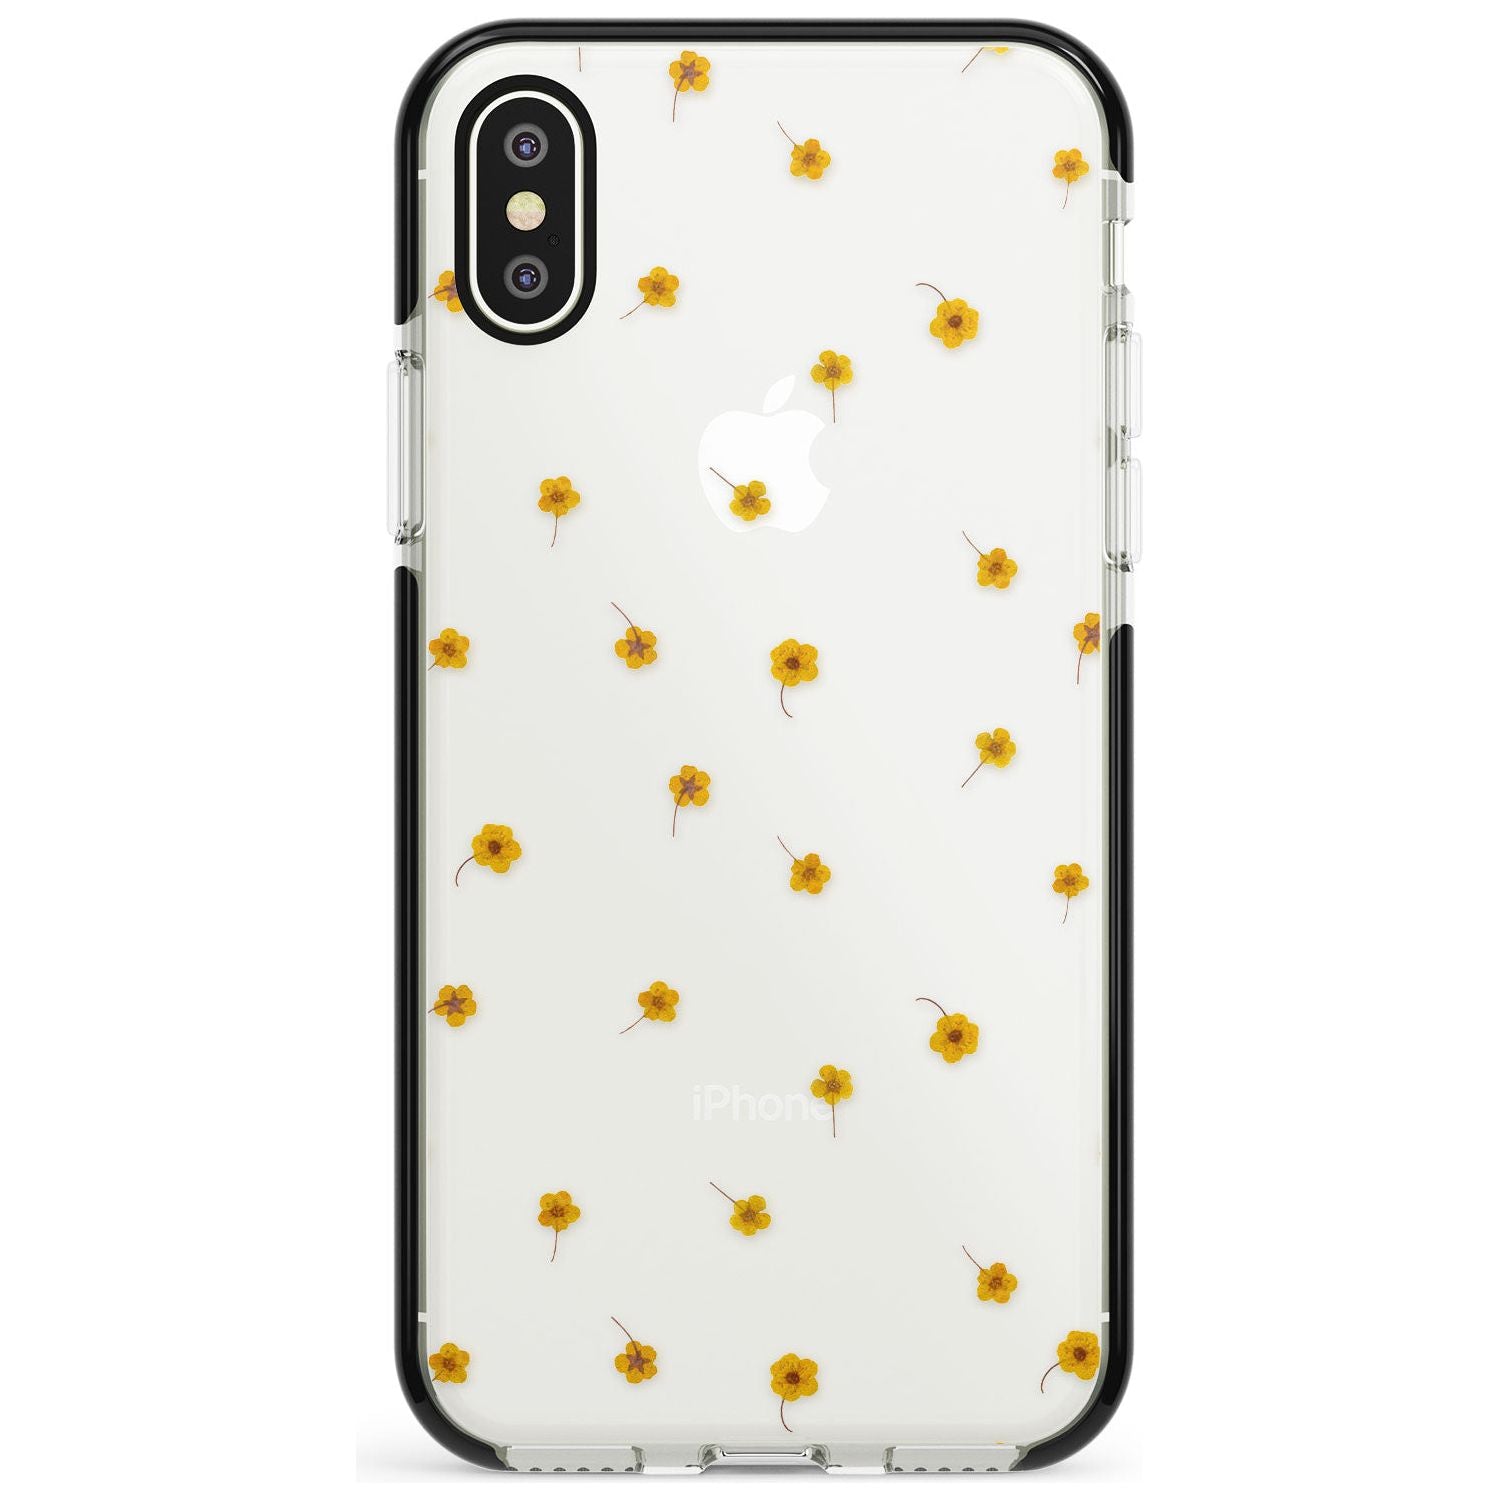 Yellow Flower Pattern - Dried Flower-Inspired Black Impact Phone Case for iPhone X XS Max XR